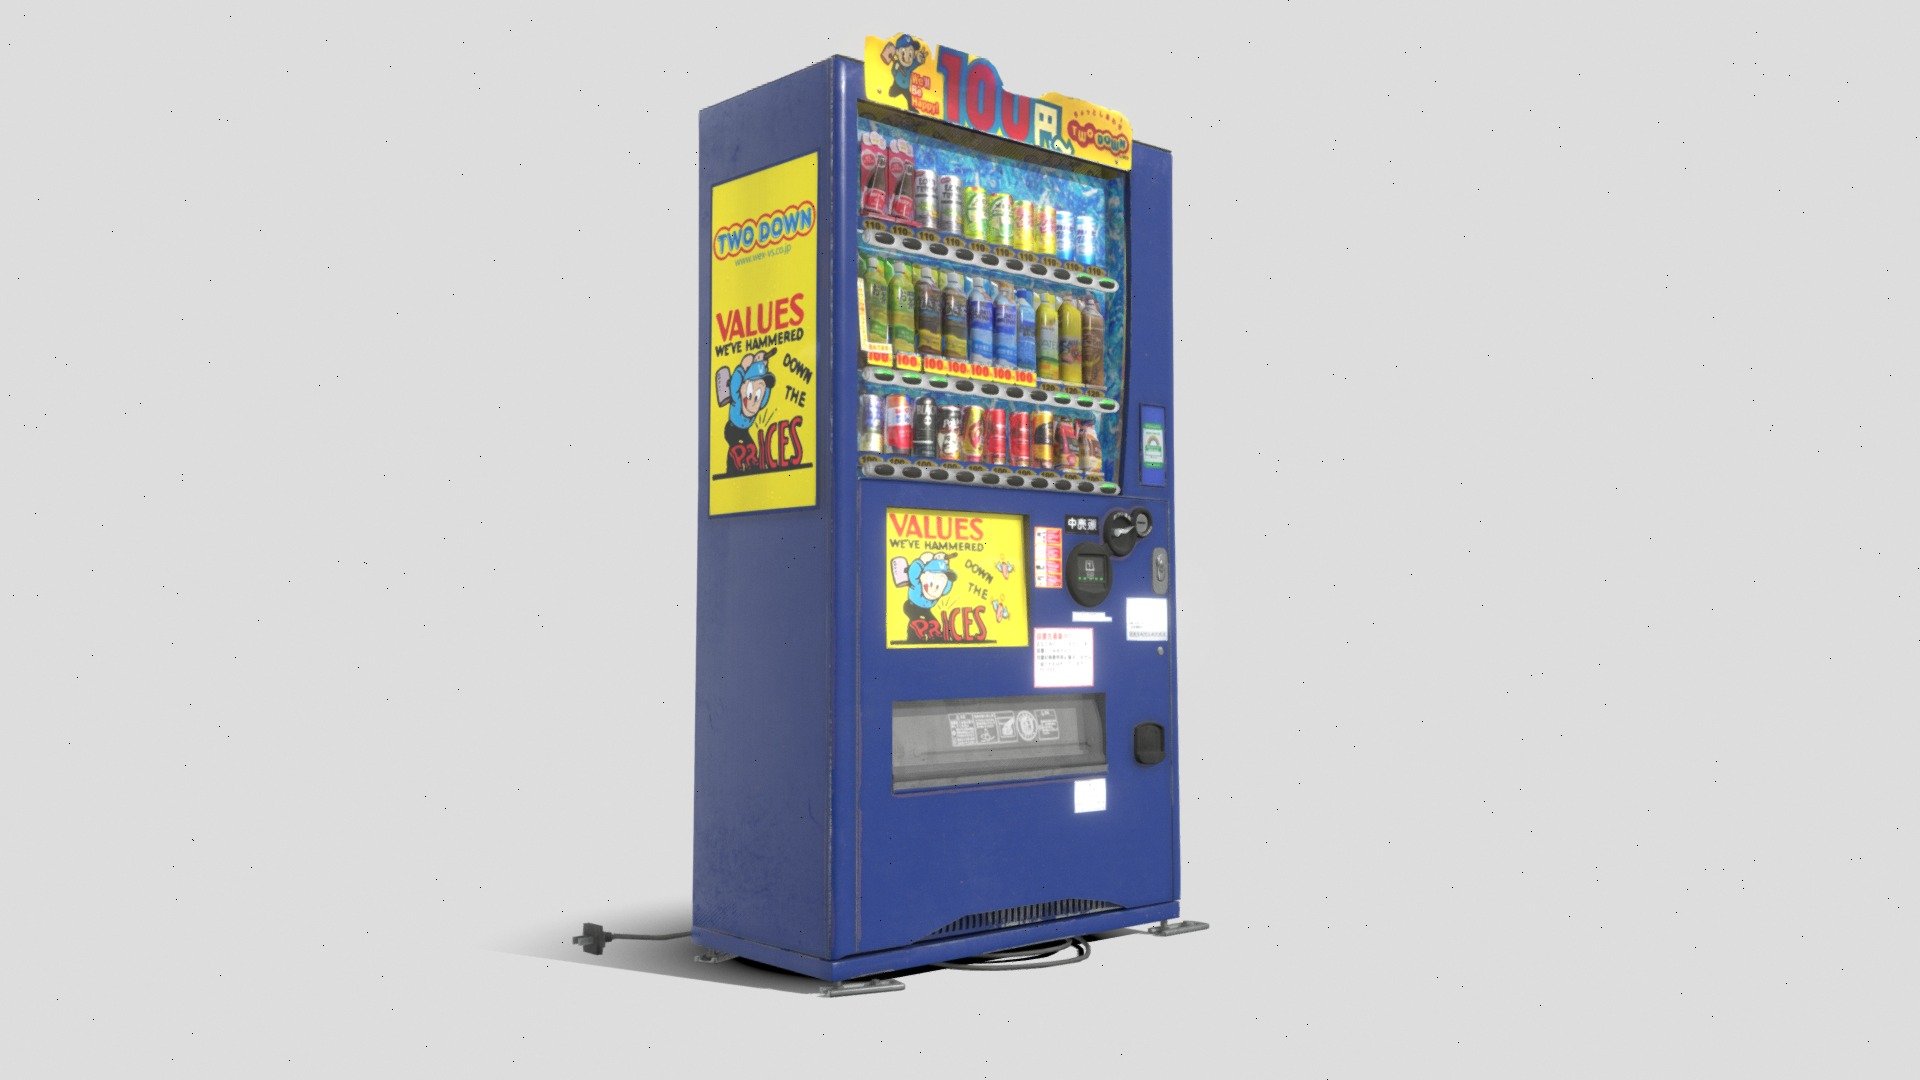 During my trip to Tokyo, Japan, I was amazed by the awesome vending machines I found. They felt really interesting, combining a vintage charm with a futuristic vibe.

So, I decided to recreate one using Blender. This 3D model is super realistic, with stunning 4K textures. It's perfect for games and other fun projects set in Tokyo.

Grab it now and add those captivating Japanese vending machine vibes to your creations! - Japanese Vending Machine from Tokyo - Buy Royalty Free 3D model by Gianluca Gatto (@shockproof) 3d model